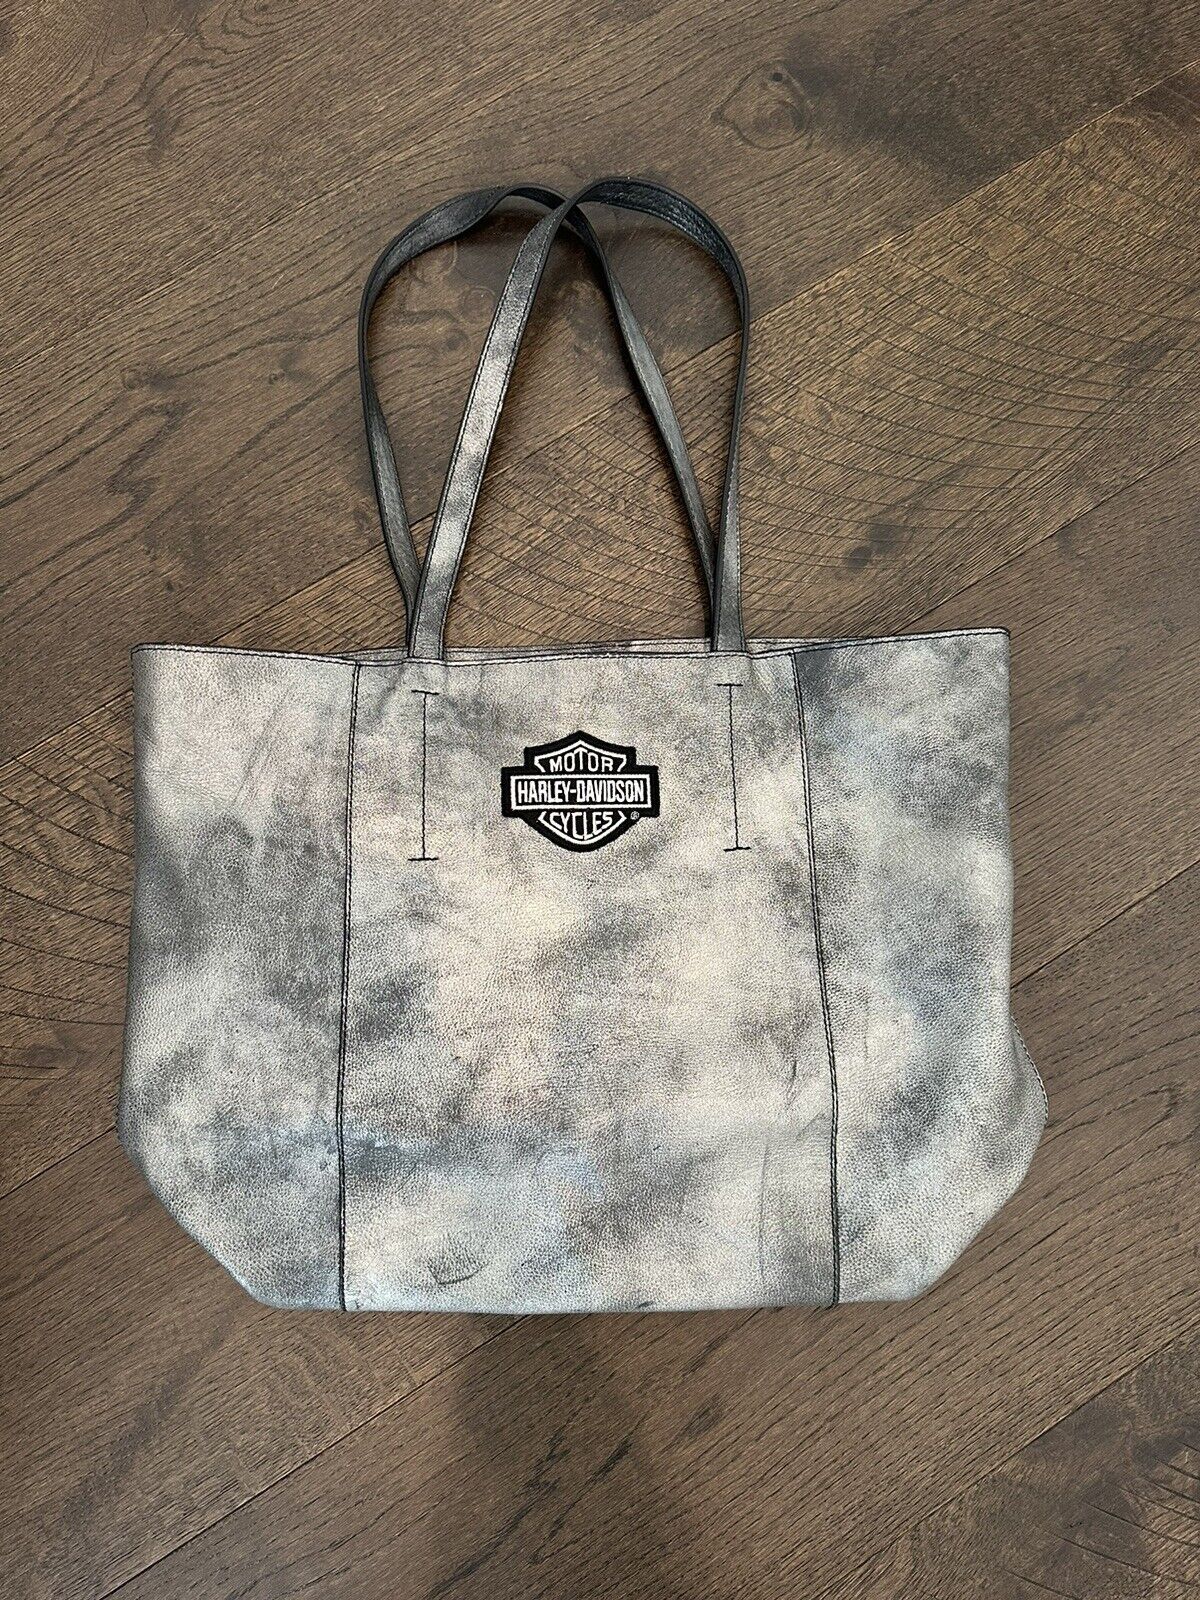 Harley Davidson Motorcycles Genuine Large Heavy Duty Leather Tote Bag